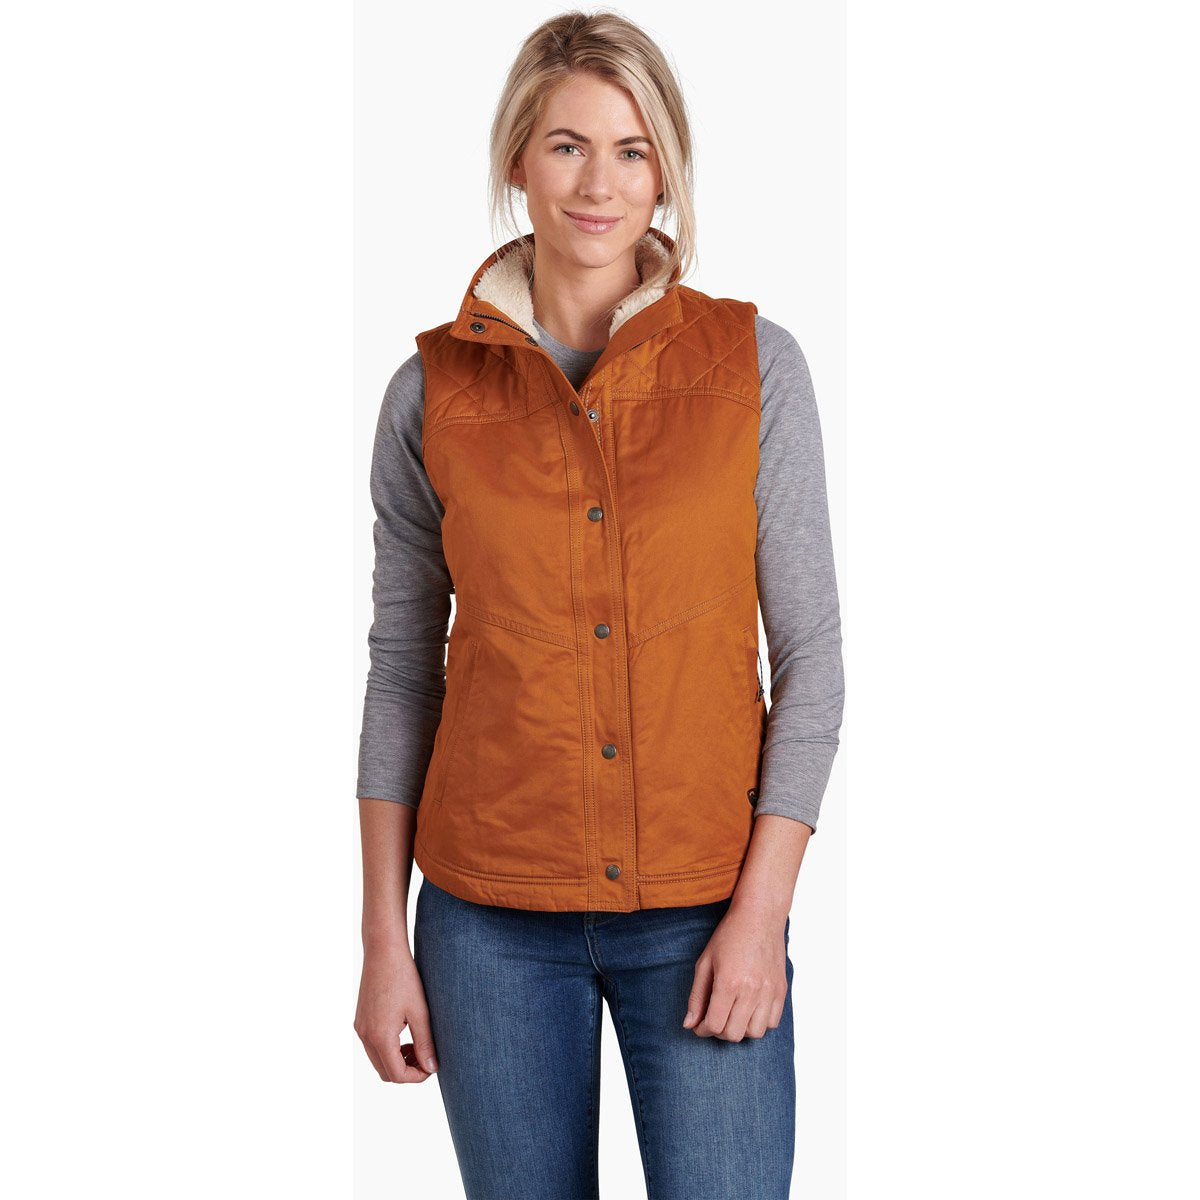 Women's Vests - Gearhead Outfitters